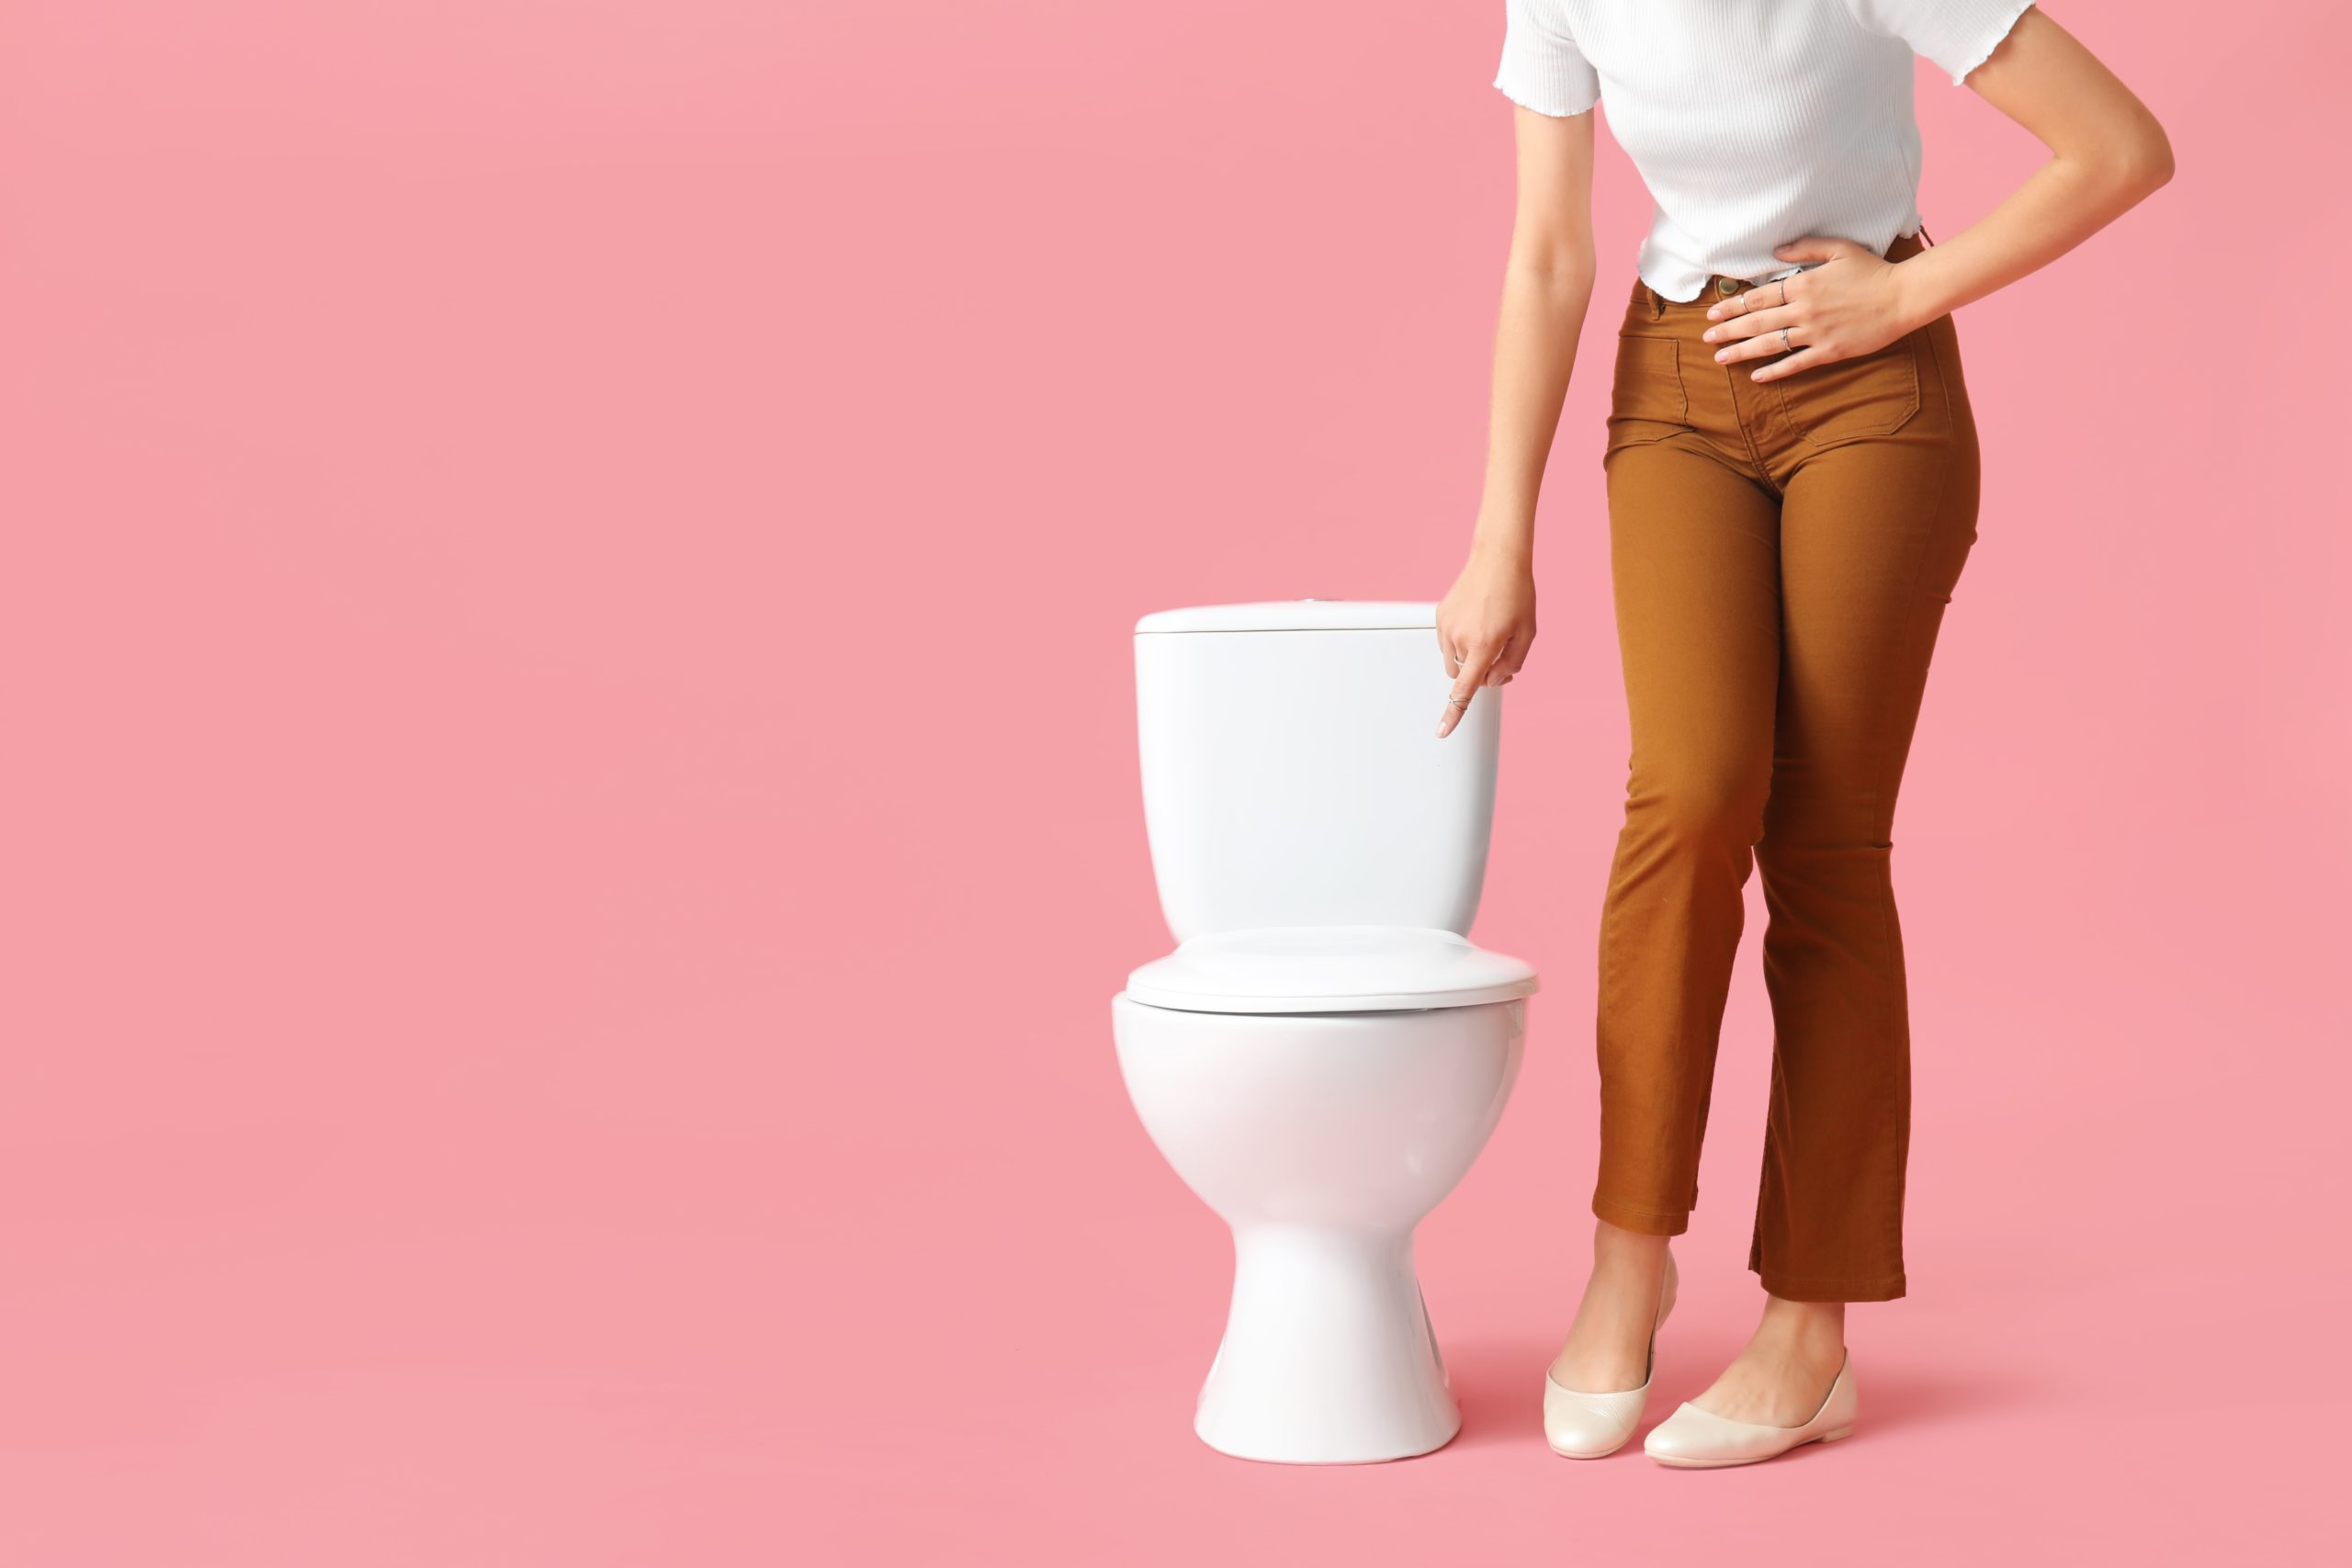 Overactive Bladder: Causes, Symptoms, and Treatment